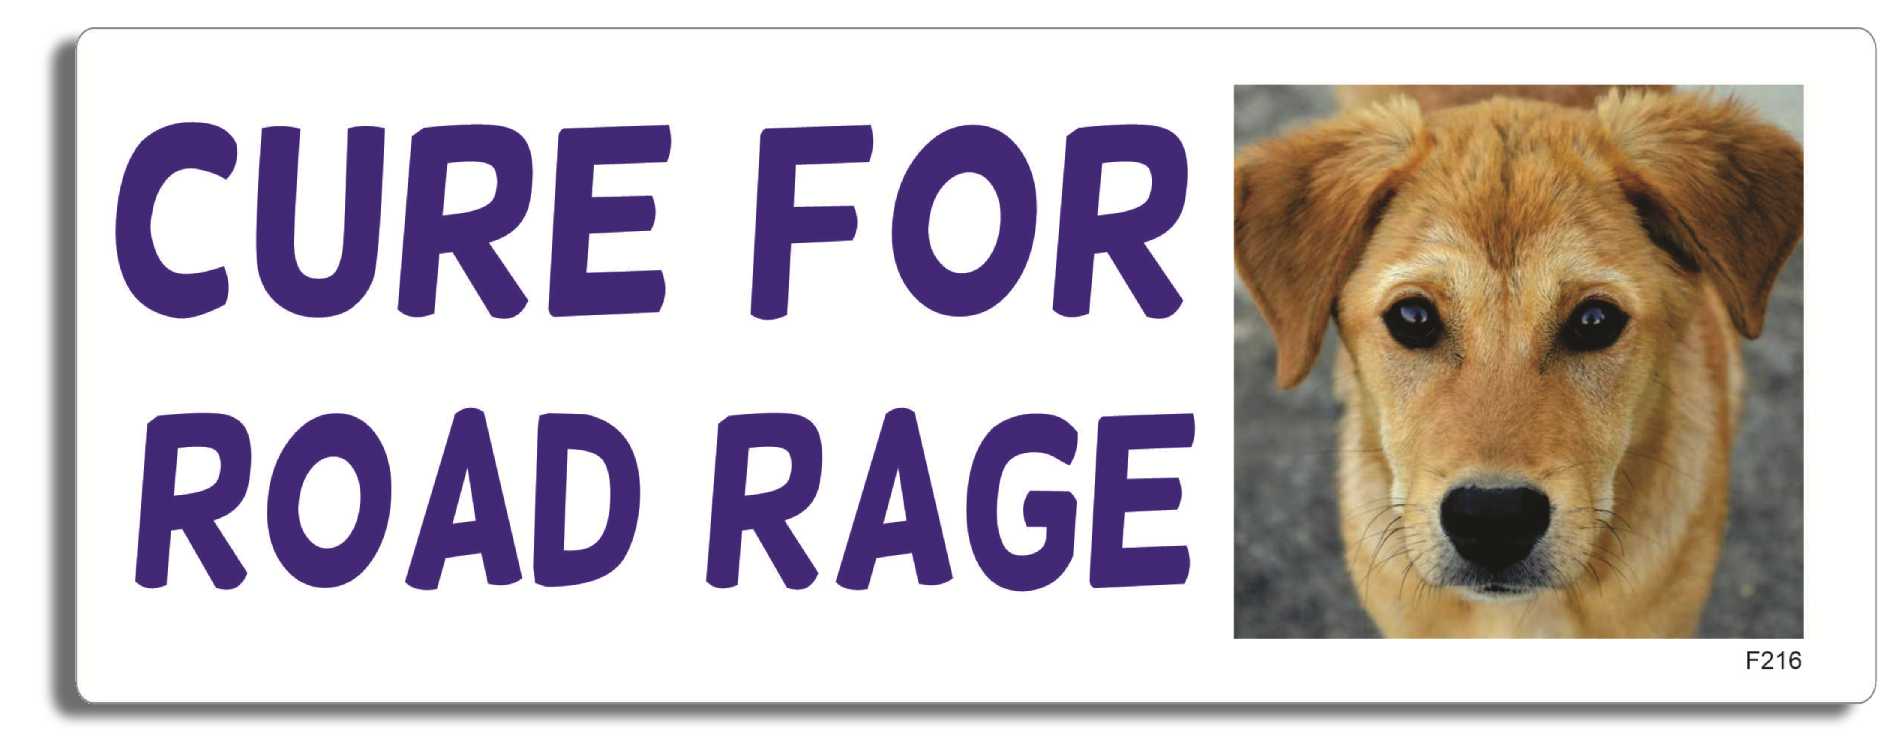 Cure For Road Rage -  3" x 8" Bumper Sticker--Car Magnet- -  Decal Bumper Sticker-funny Bumper Sticker Car Magnet Cure For Road Rage-  Decal for carsdog, dog lover, Dogs, funny bumper sticker, funny quote, funny quotes, puppy